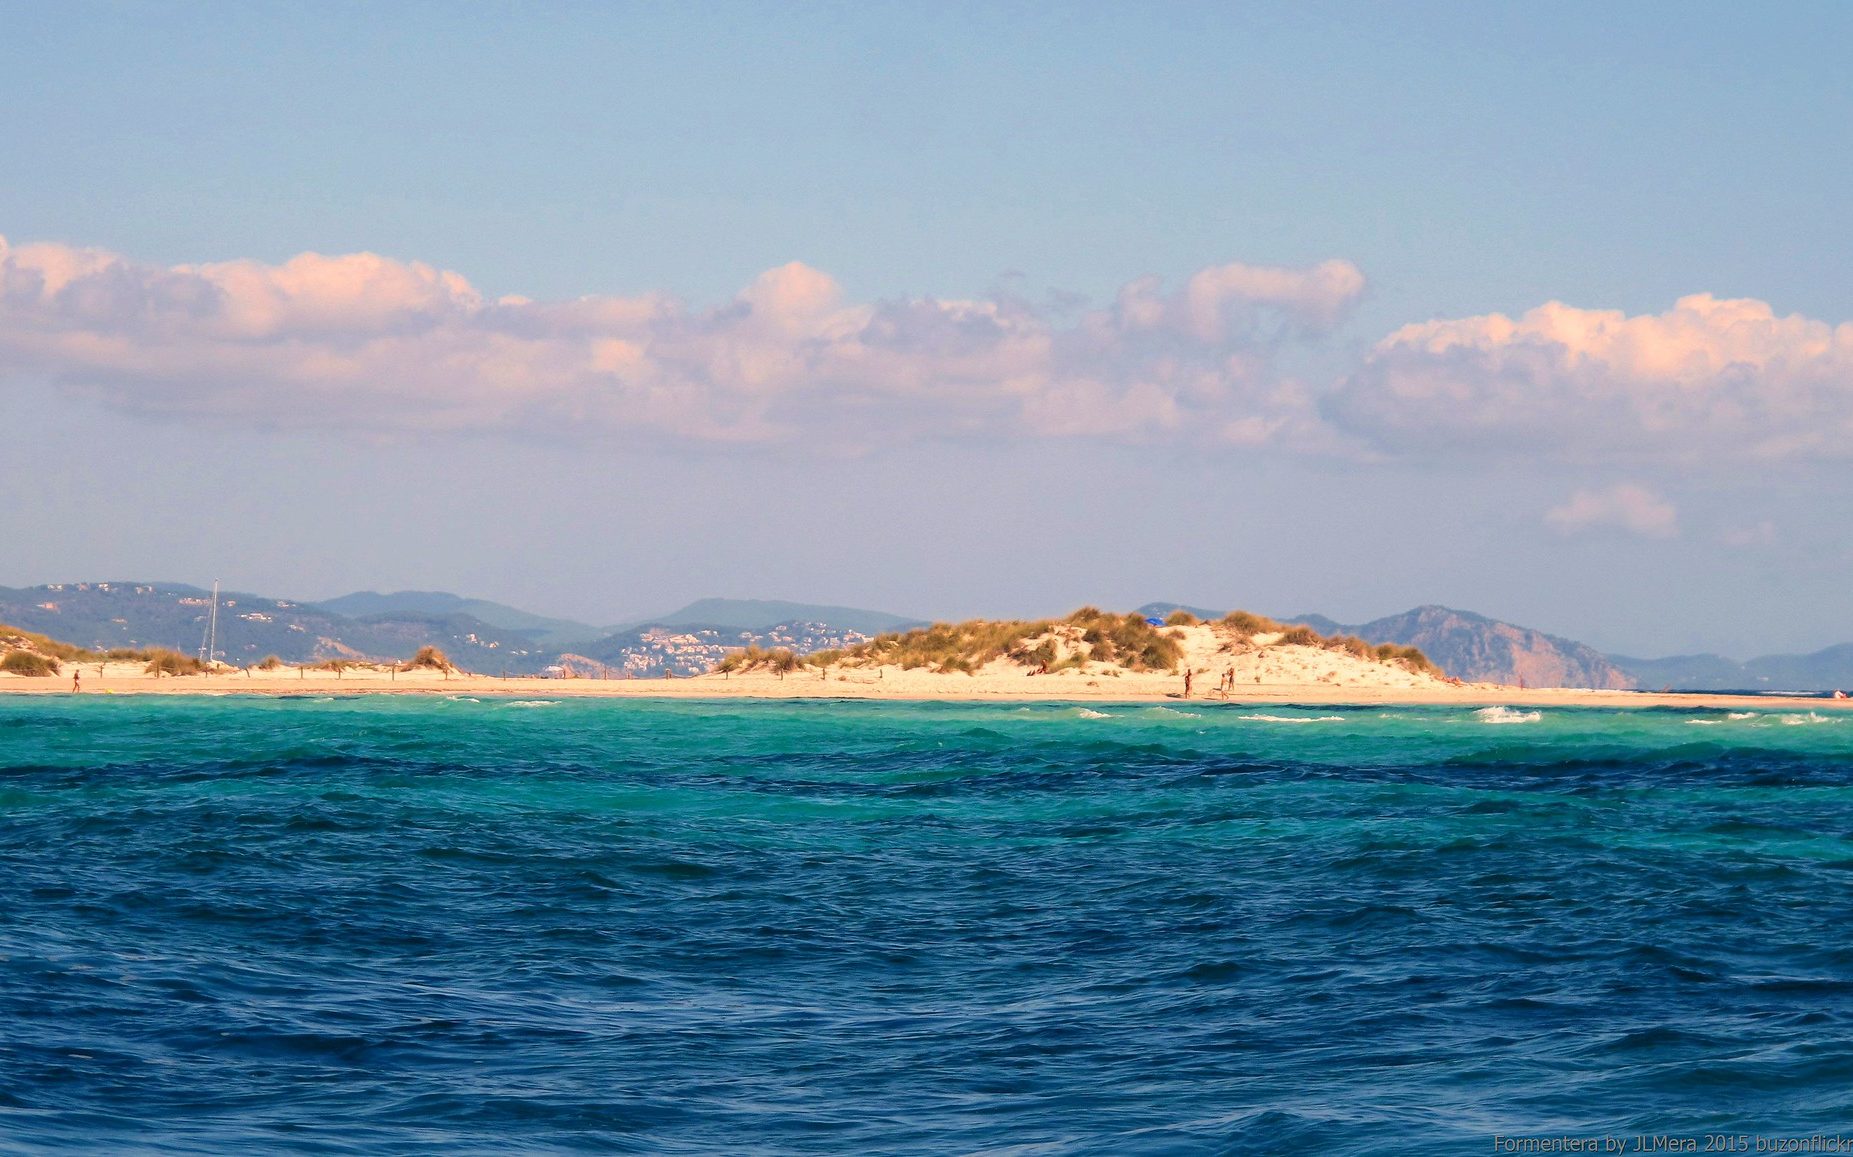 14-days itinerary in Southern Spain - Balear Ambitions
Formentera